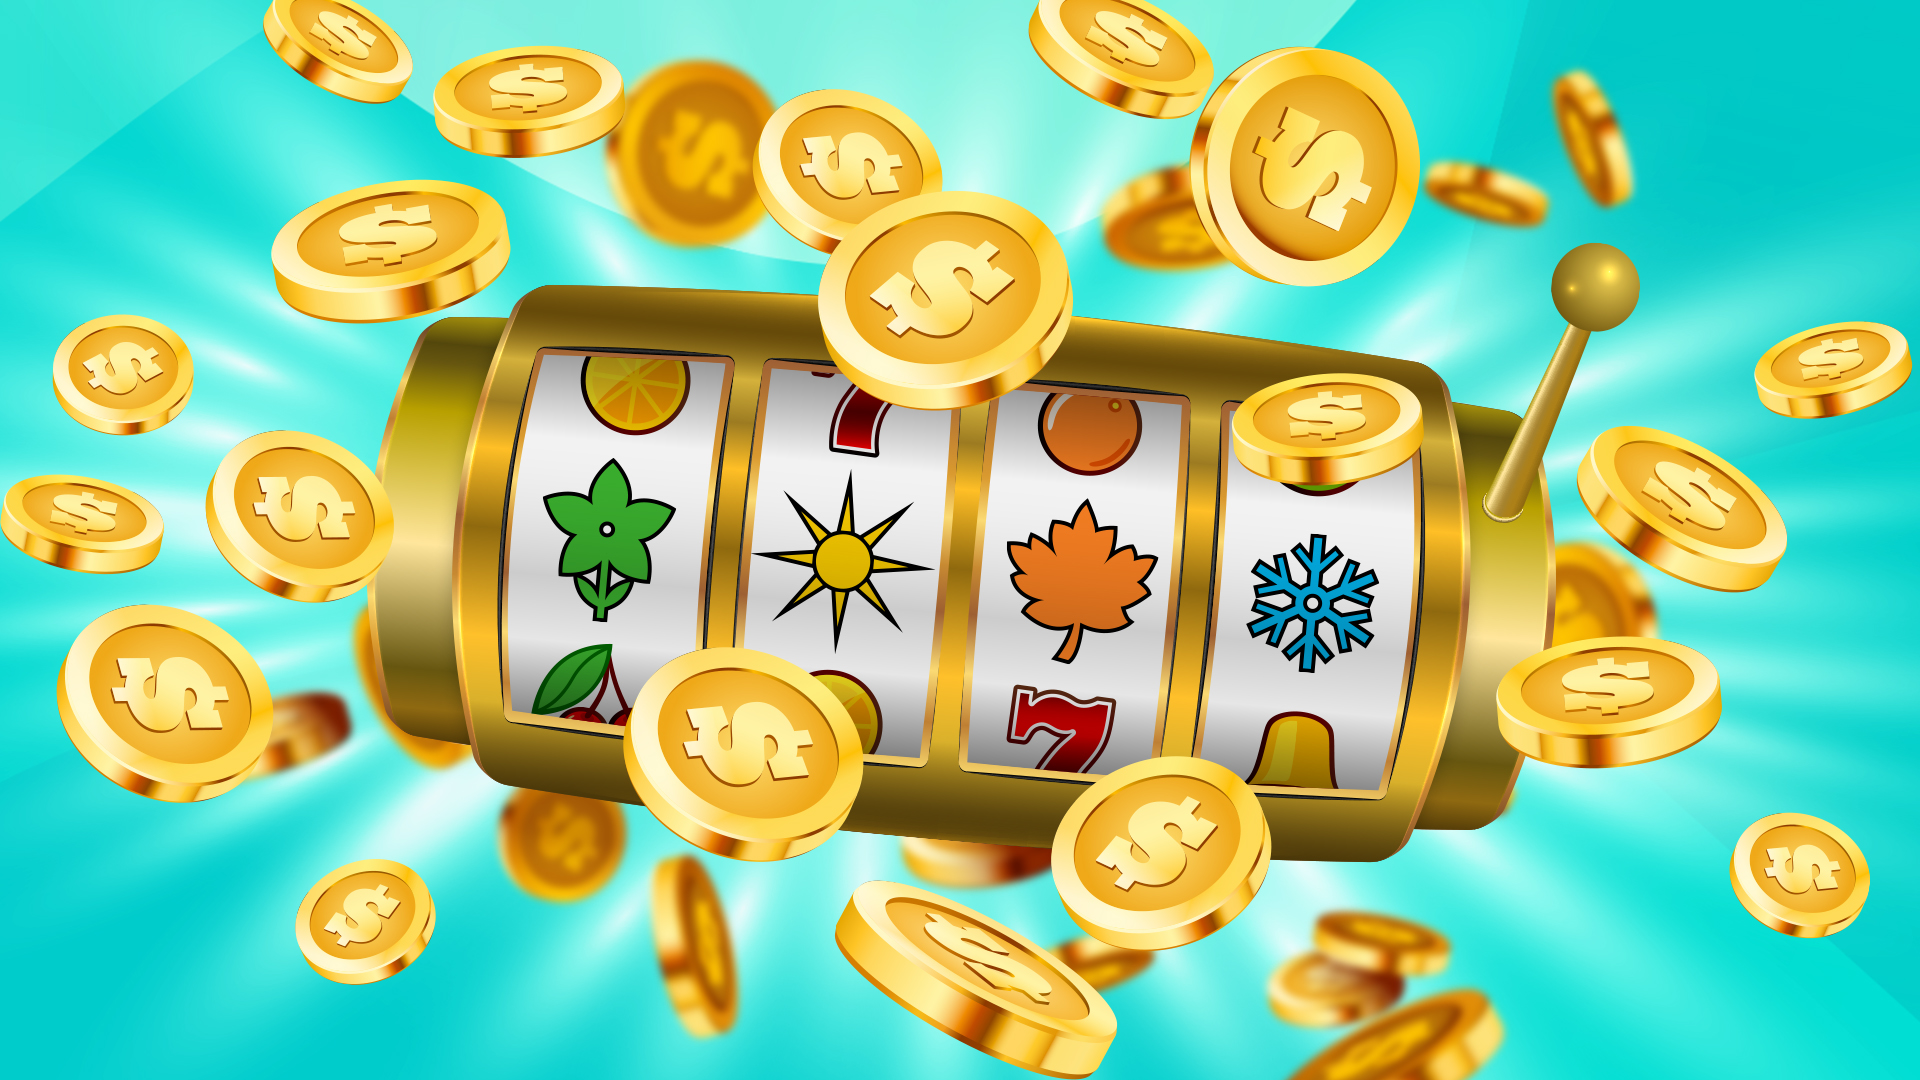 A slots reel featuring seasonal slots symbols, surrounded by gold coins, set against an aqua blue background.